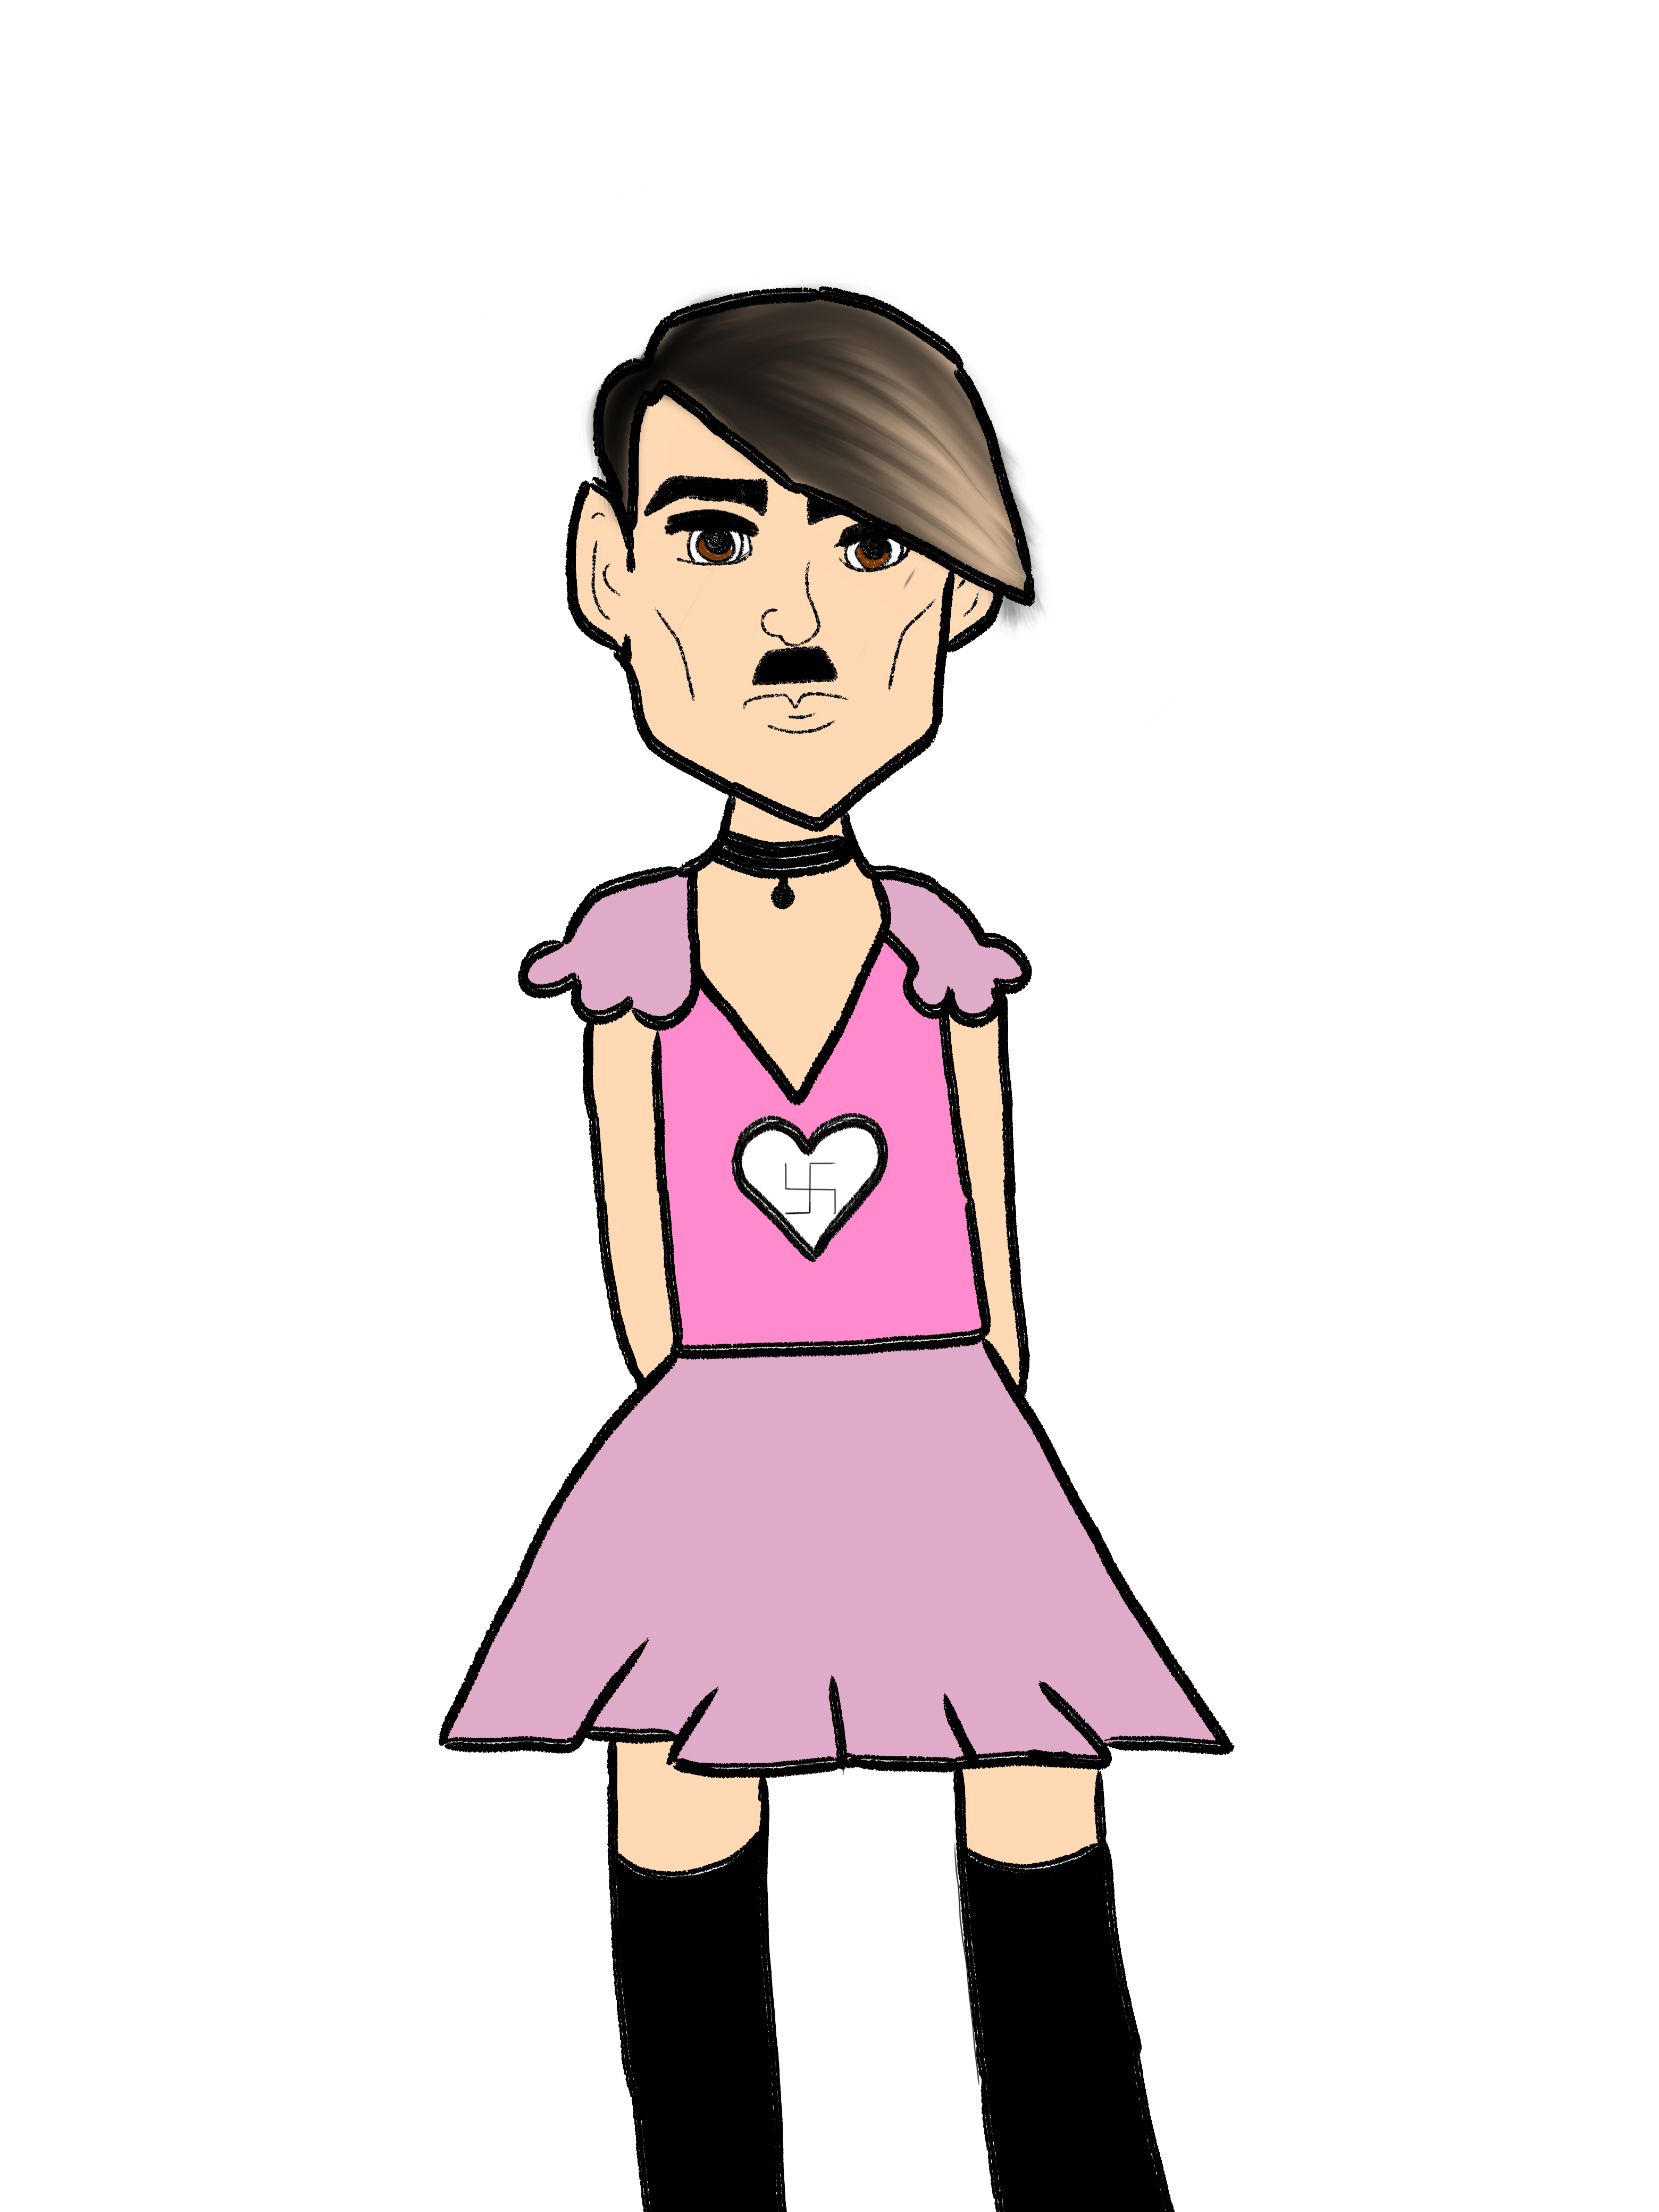 Adolf Hitler in a dress by my gf and I : Beginner_Art.